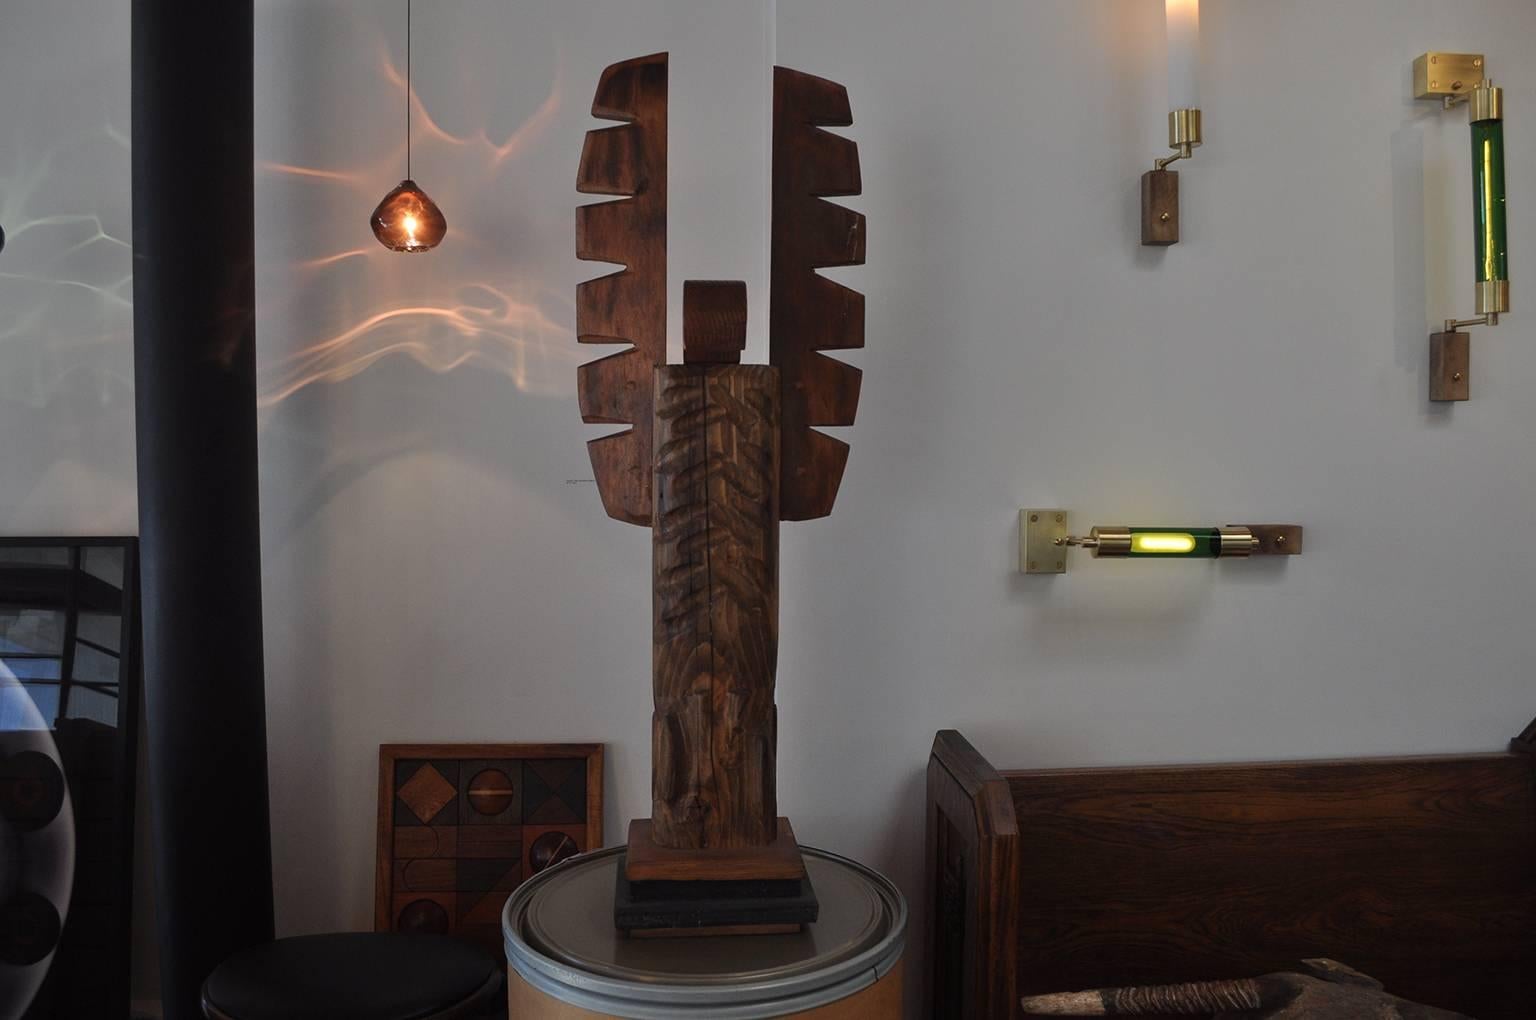 Large-scale hand-carved TOTEM from the Pacific Northwest.